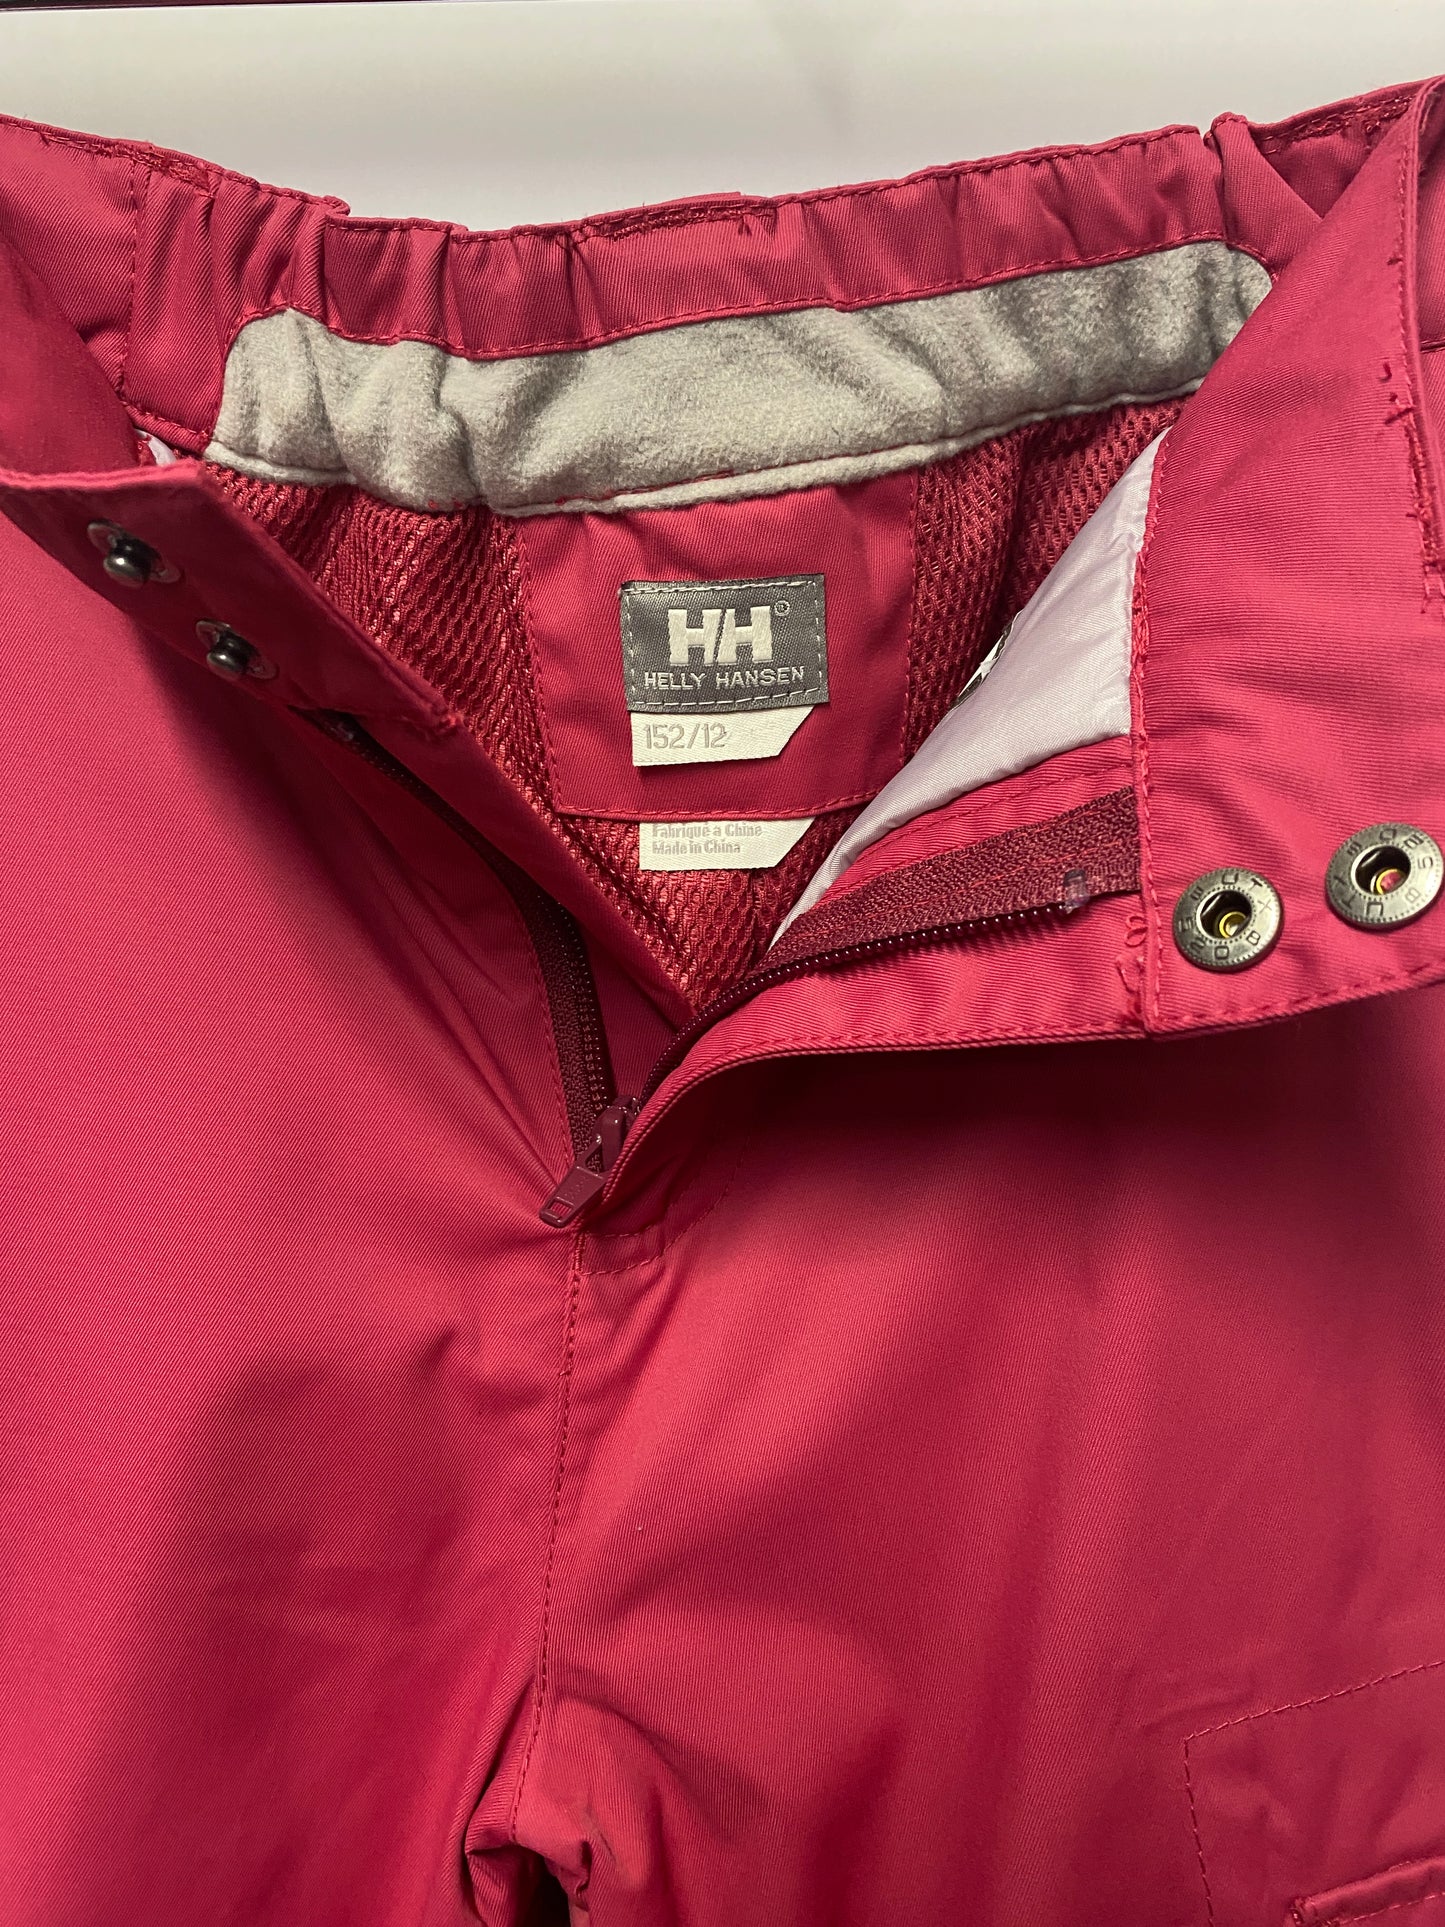 Helly Hansen Pink Insulated Waterproof Salopettes Age 12